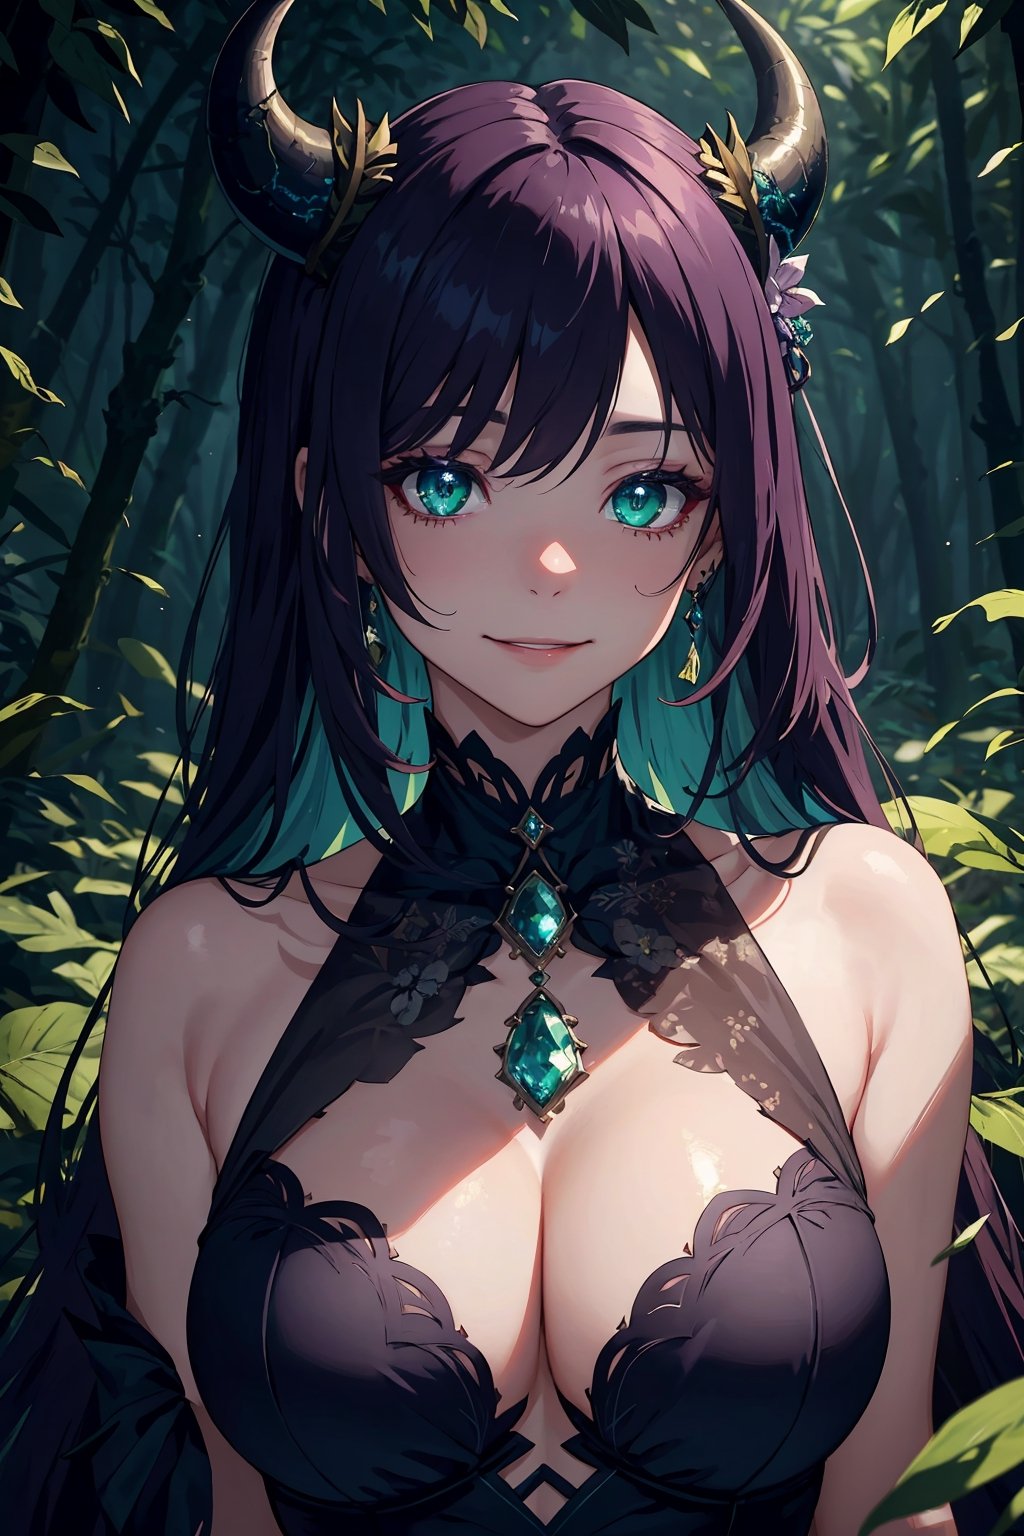 Imagine a beautiful woman with long and wild dark purple hair hair flowing freely around her. She has horns. Her dragon eyes are bright green, sparkling with intricate detail. She smiles like she is scheming something. She wears a gorgeous dress with a fine touch and she wears fine jewelery. The background is a creepy forest with dim lighting, creating an ominous ambiance. She is surrounded by sparking magic. This artwork captures a creepy atmosphere against the backdrop of a beautiful yet dimly lit setting, detailed, detail_eyes, detailed_hair, detailed_scenario, detailed_hands, detailed_background. girl, fine clothing, ,nilou \(genshin impact\),KurashimaChiyuri,mano aloe